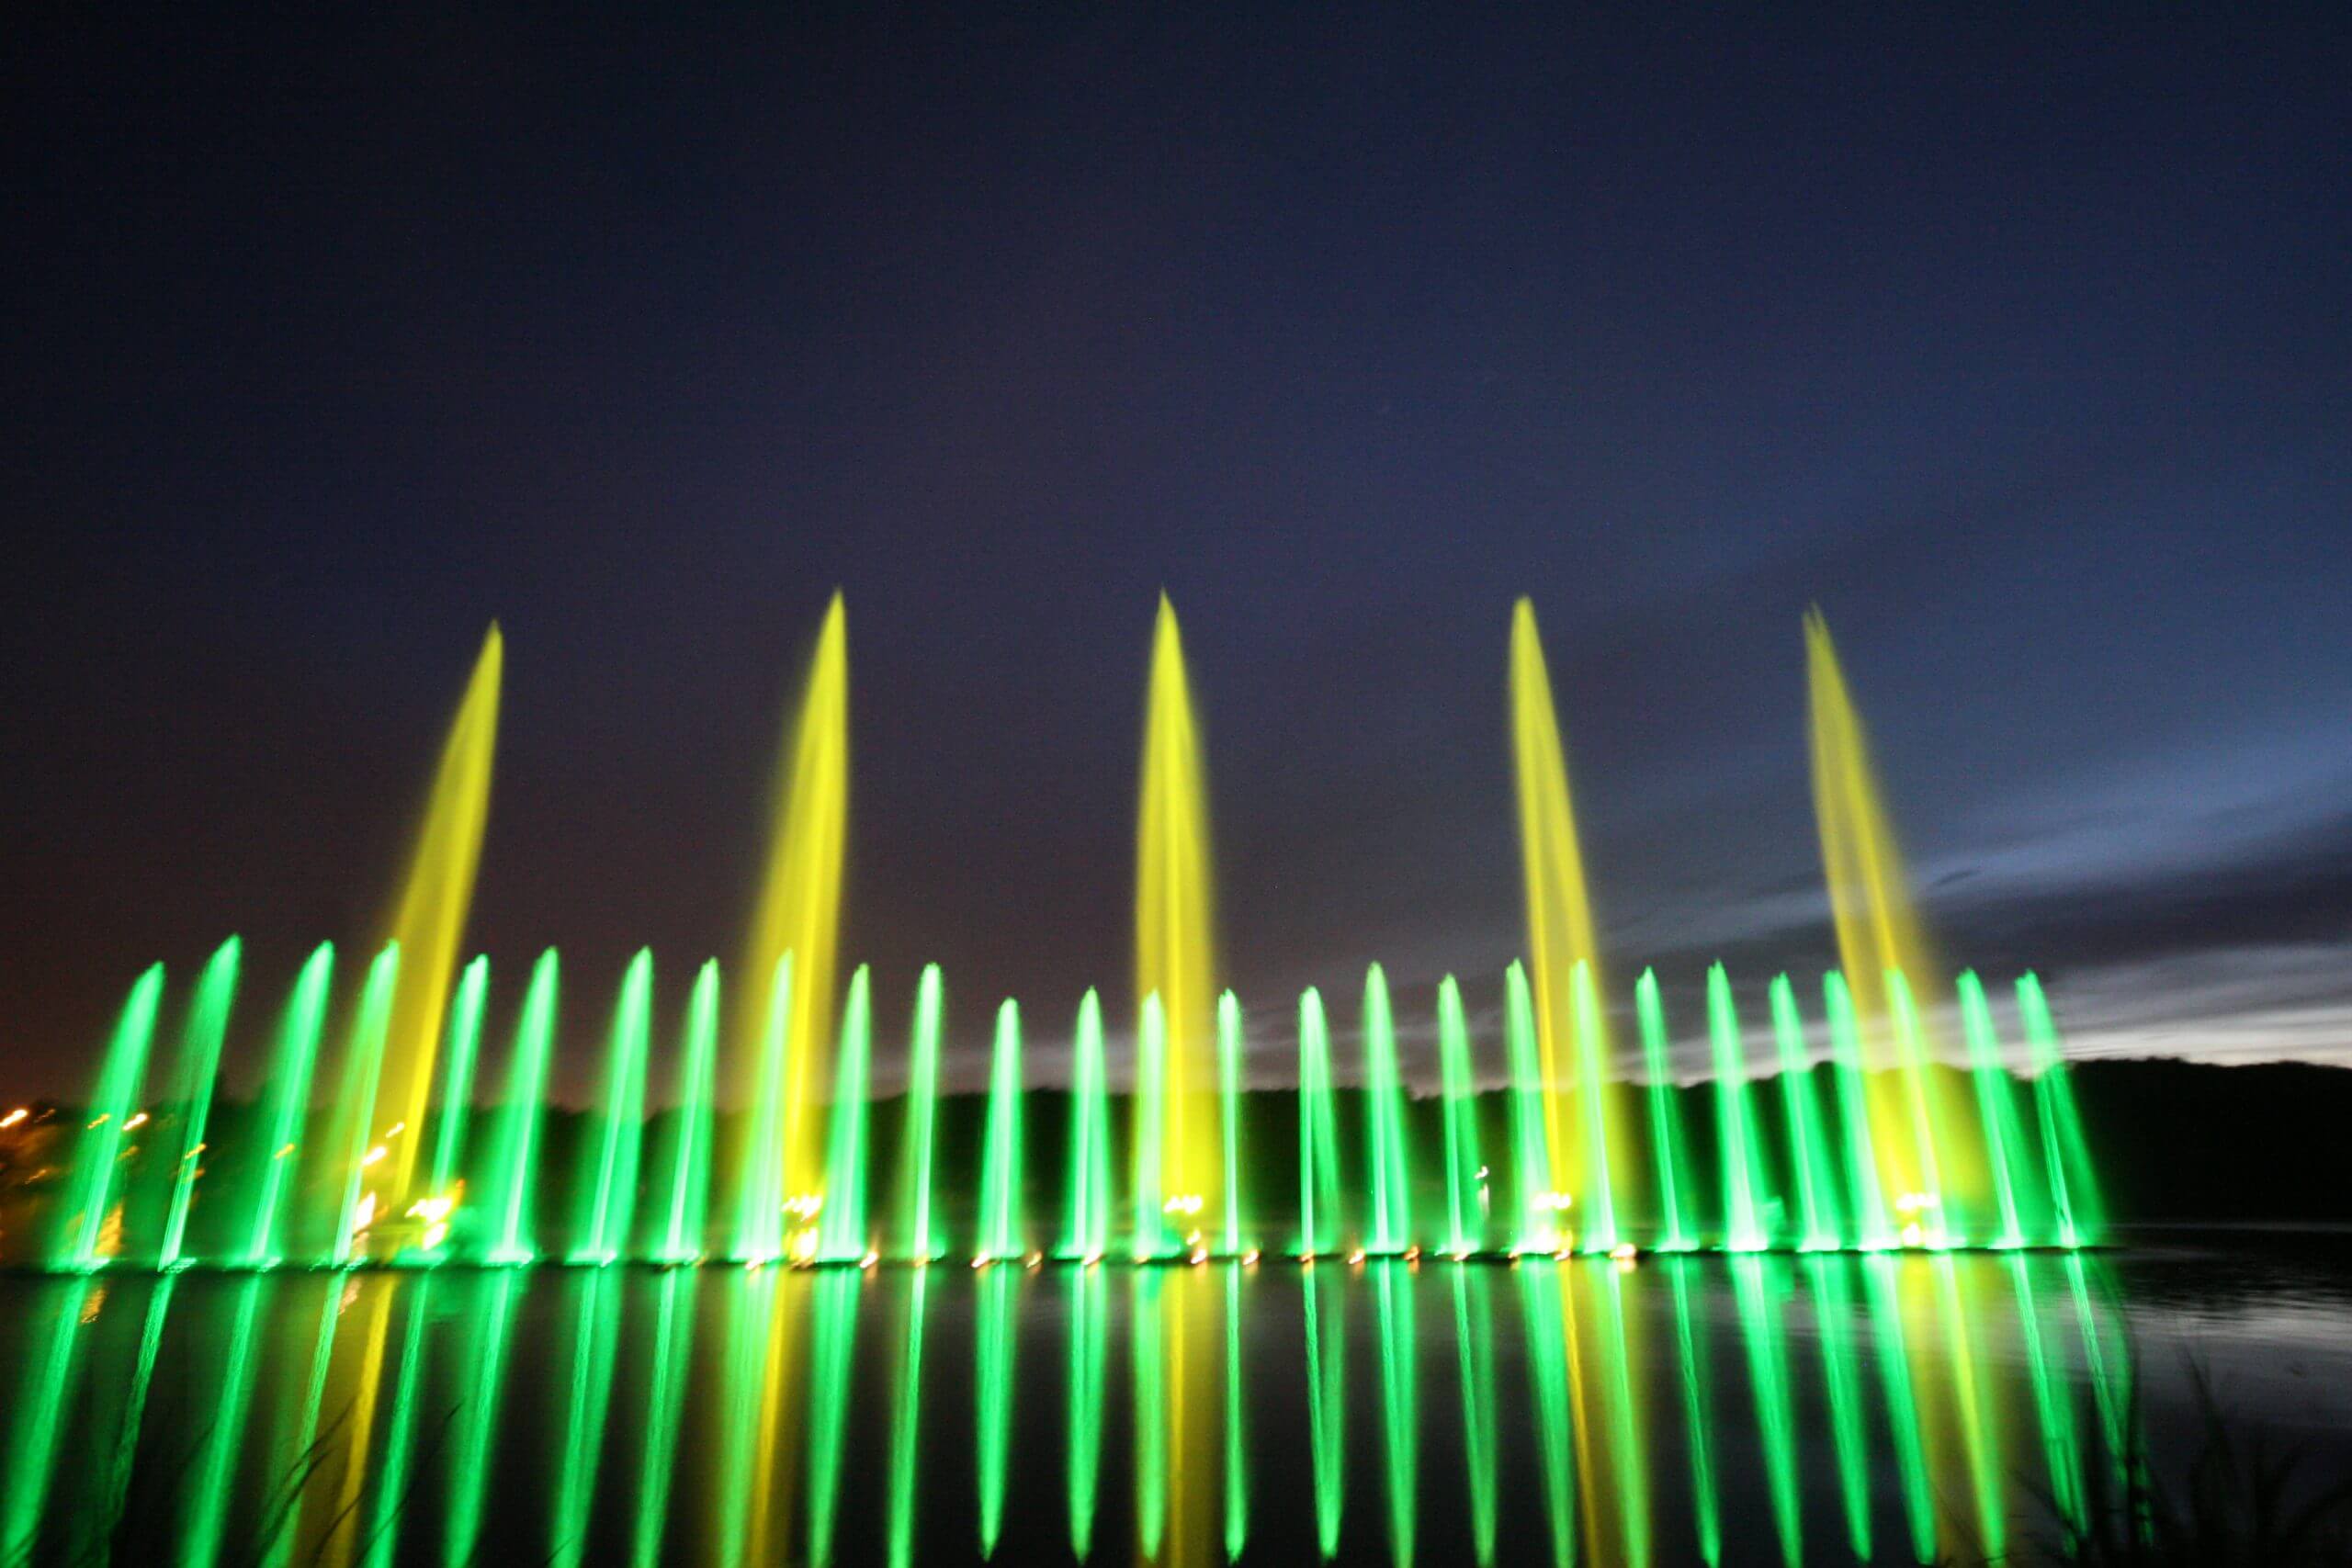 Atlantid - Photo of green and yellow water jets